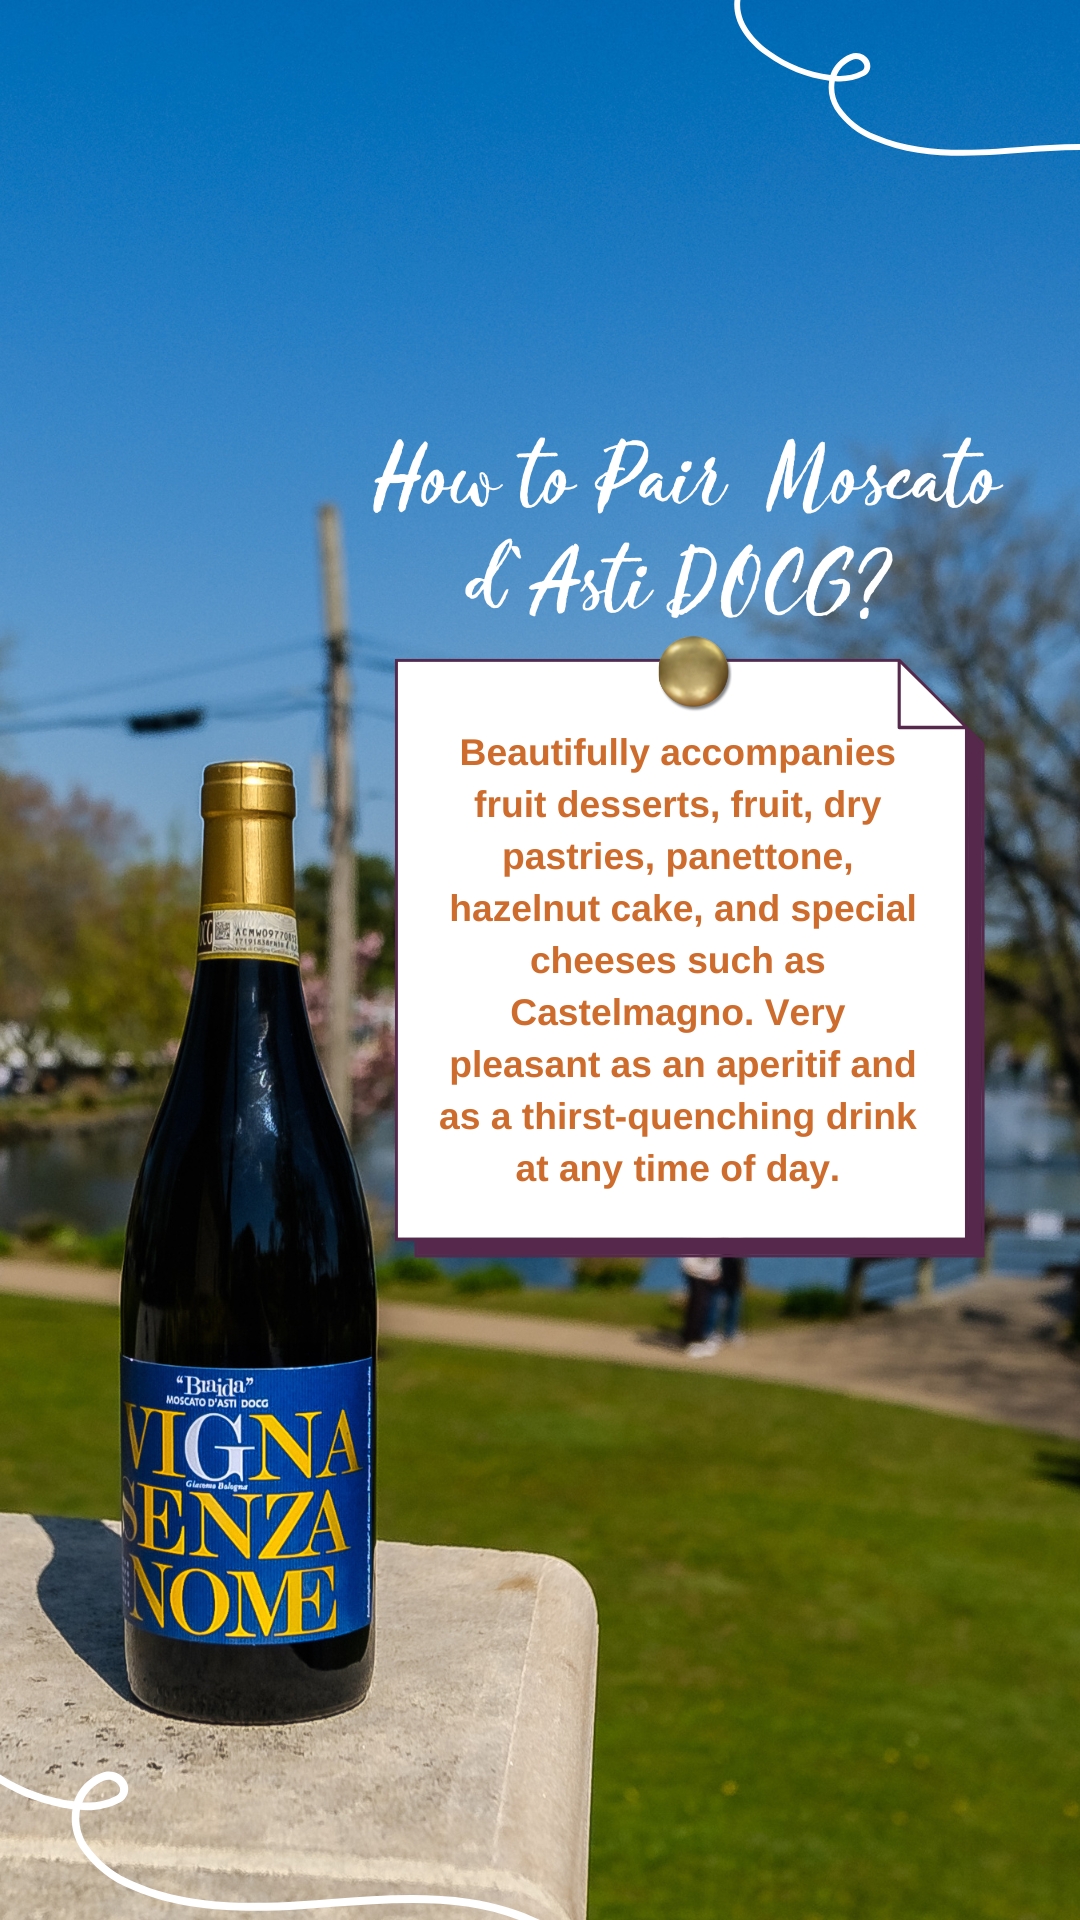 Have you heard about Moscato d'Asti DOCG?